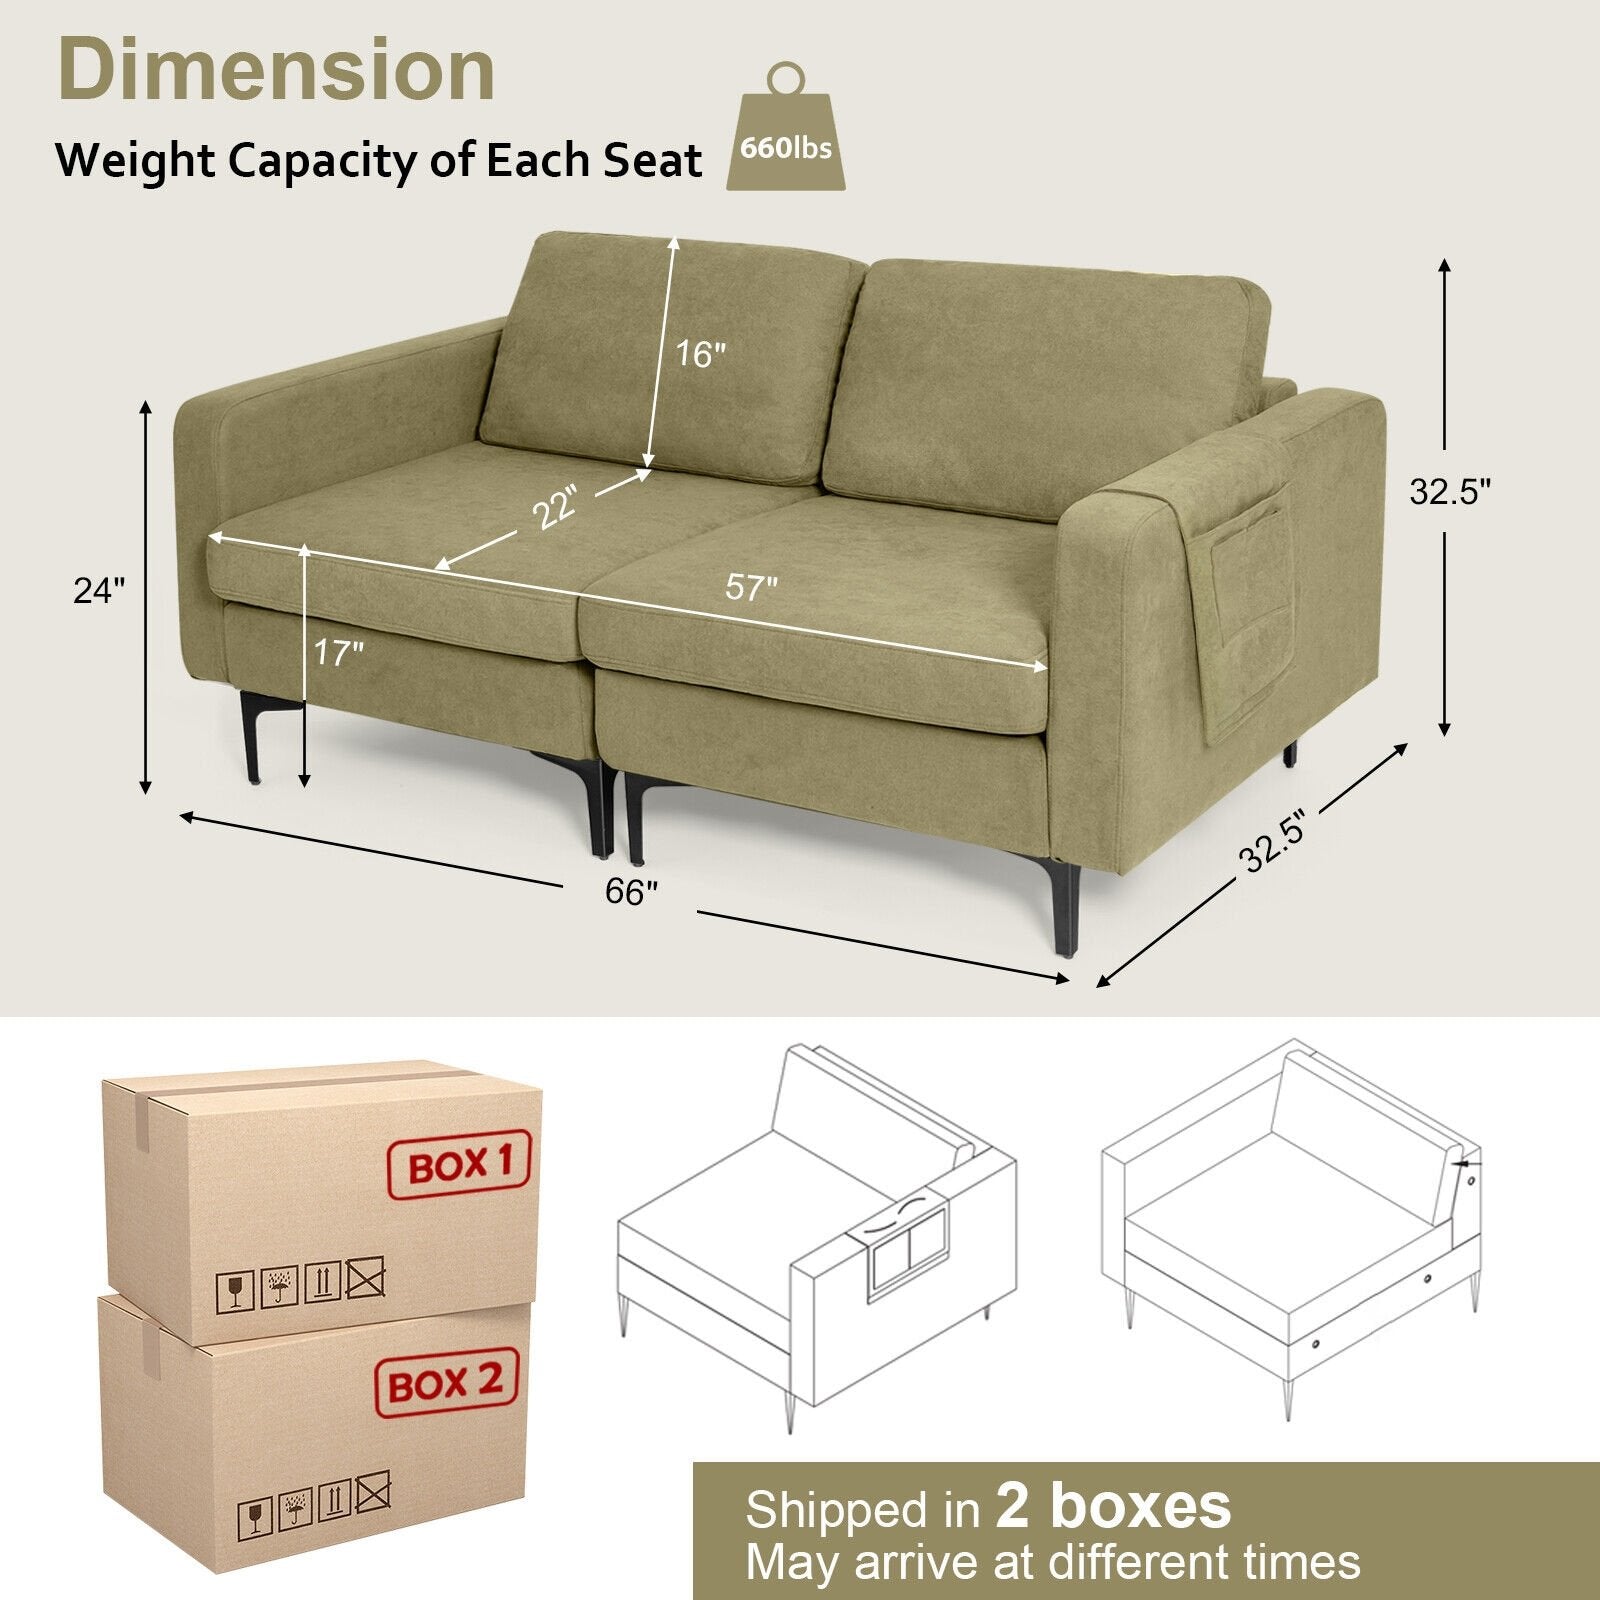 Modern Loveseat Sofa Couch with Side Storage Pocket and Sponged Padded Seat Cushions, Green - Gallery Canada